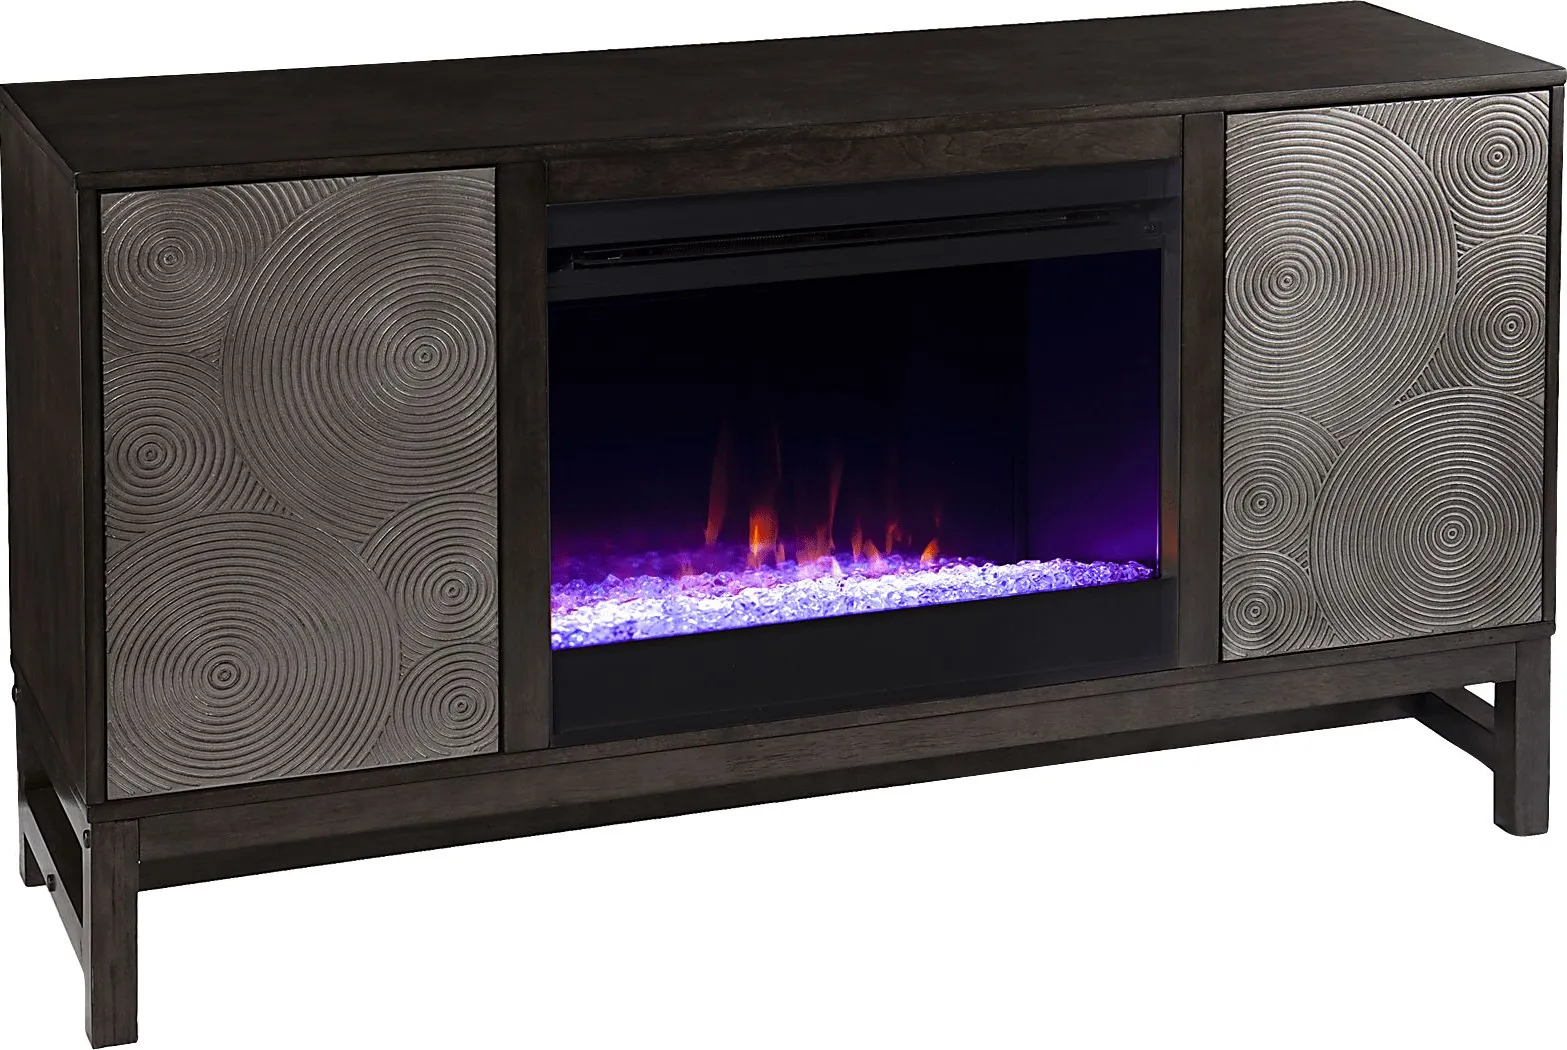 Lysander I Brown 54 in. Console, With Color Changing Electric Fireplace